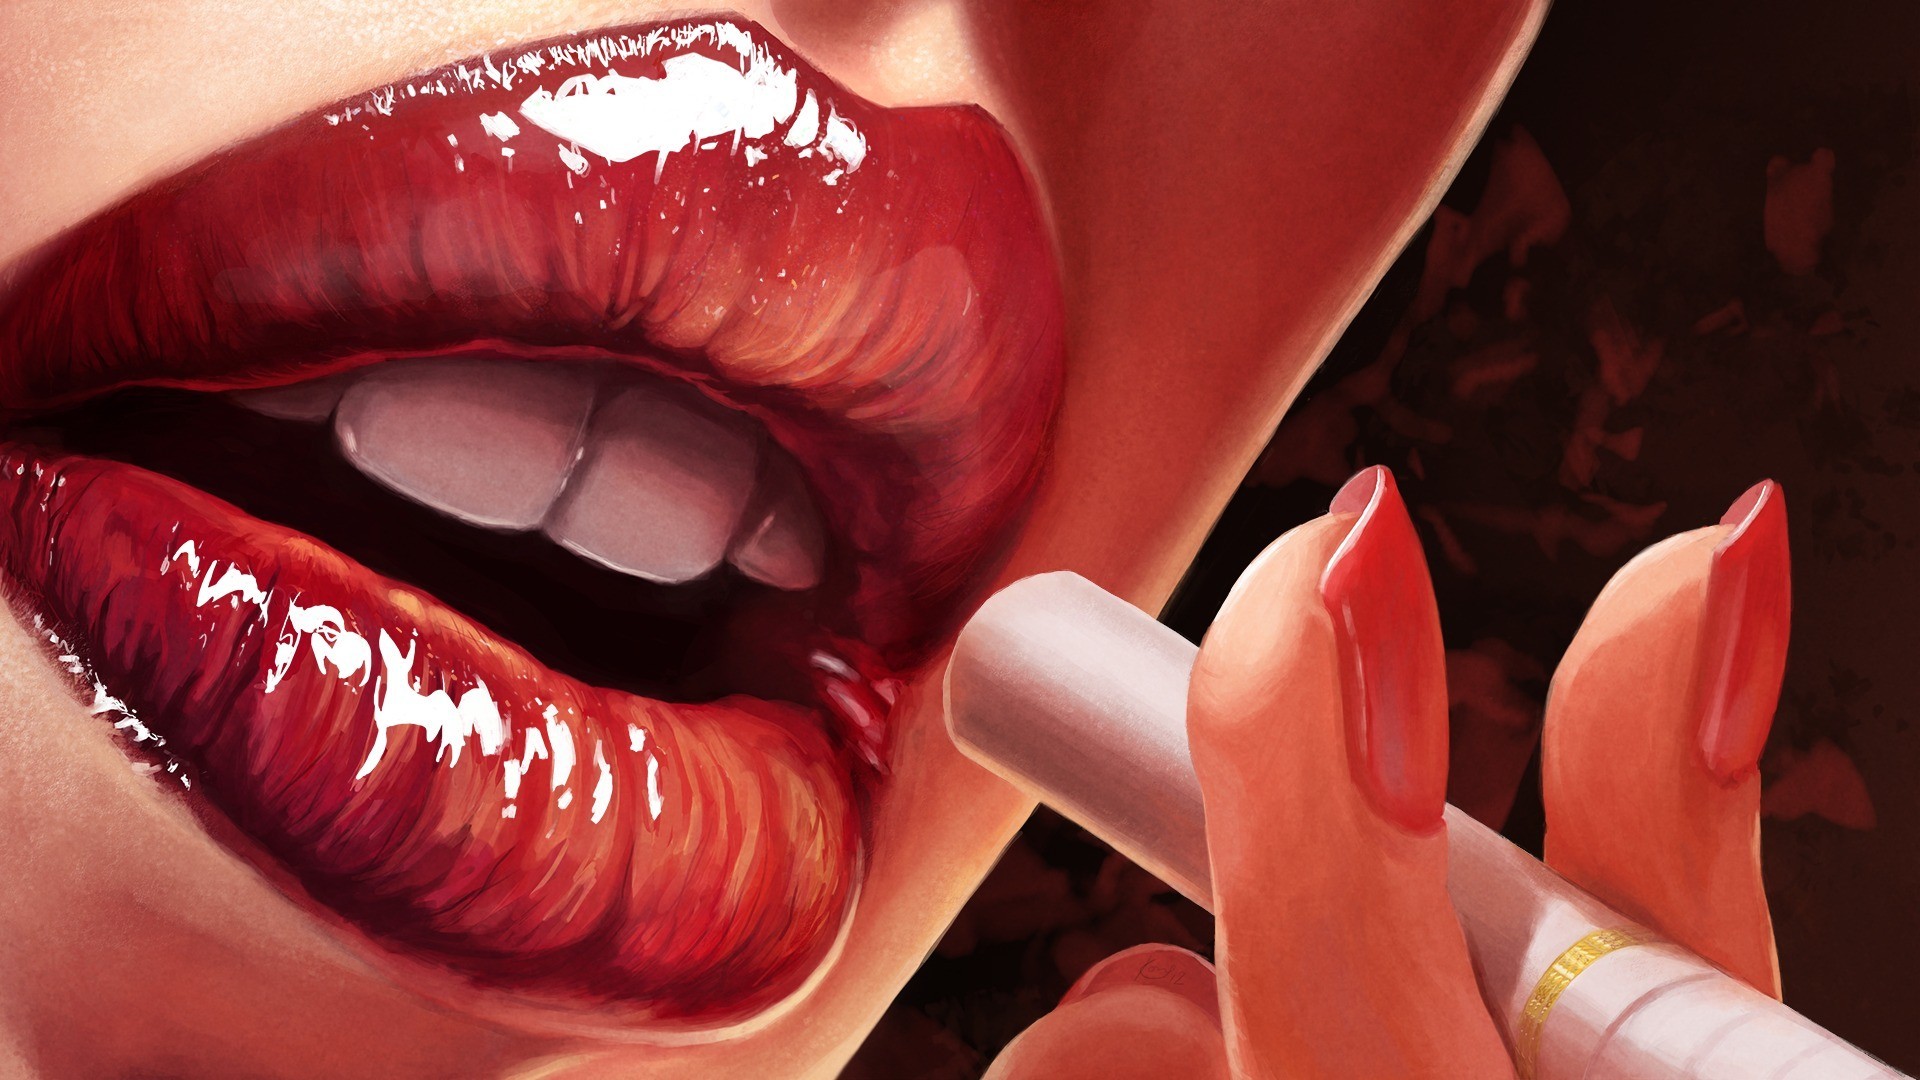 General 1920x1080 red lipstick painting smoking lips cigarettes digital art mouth red artwork painted nails women